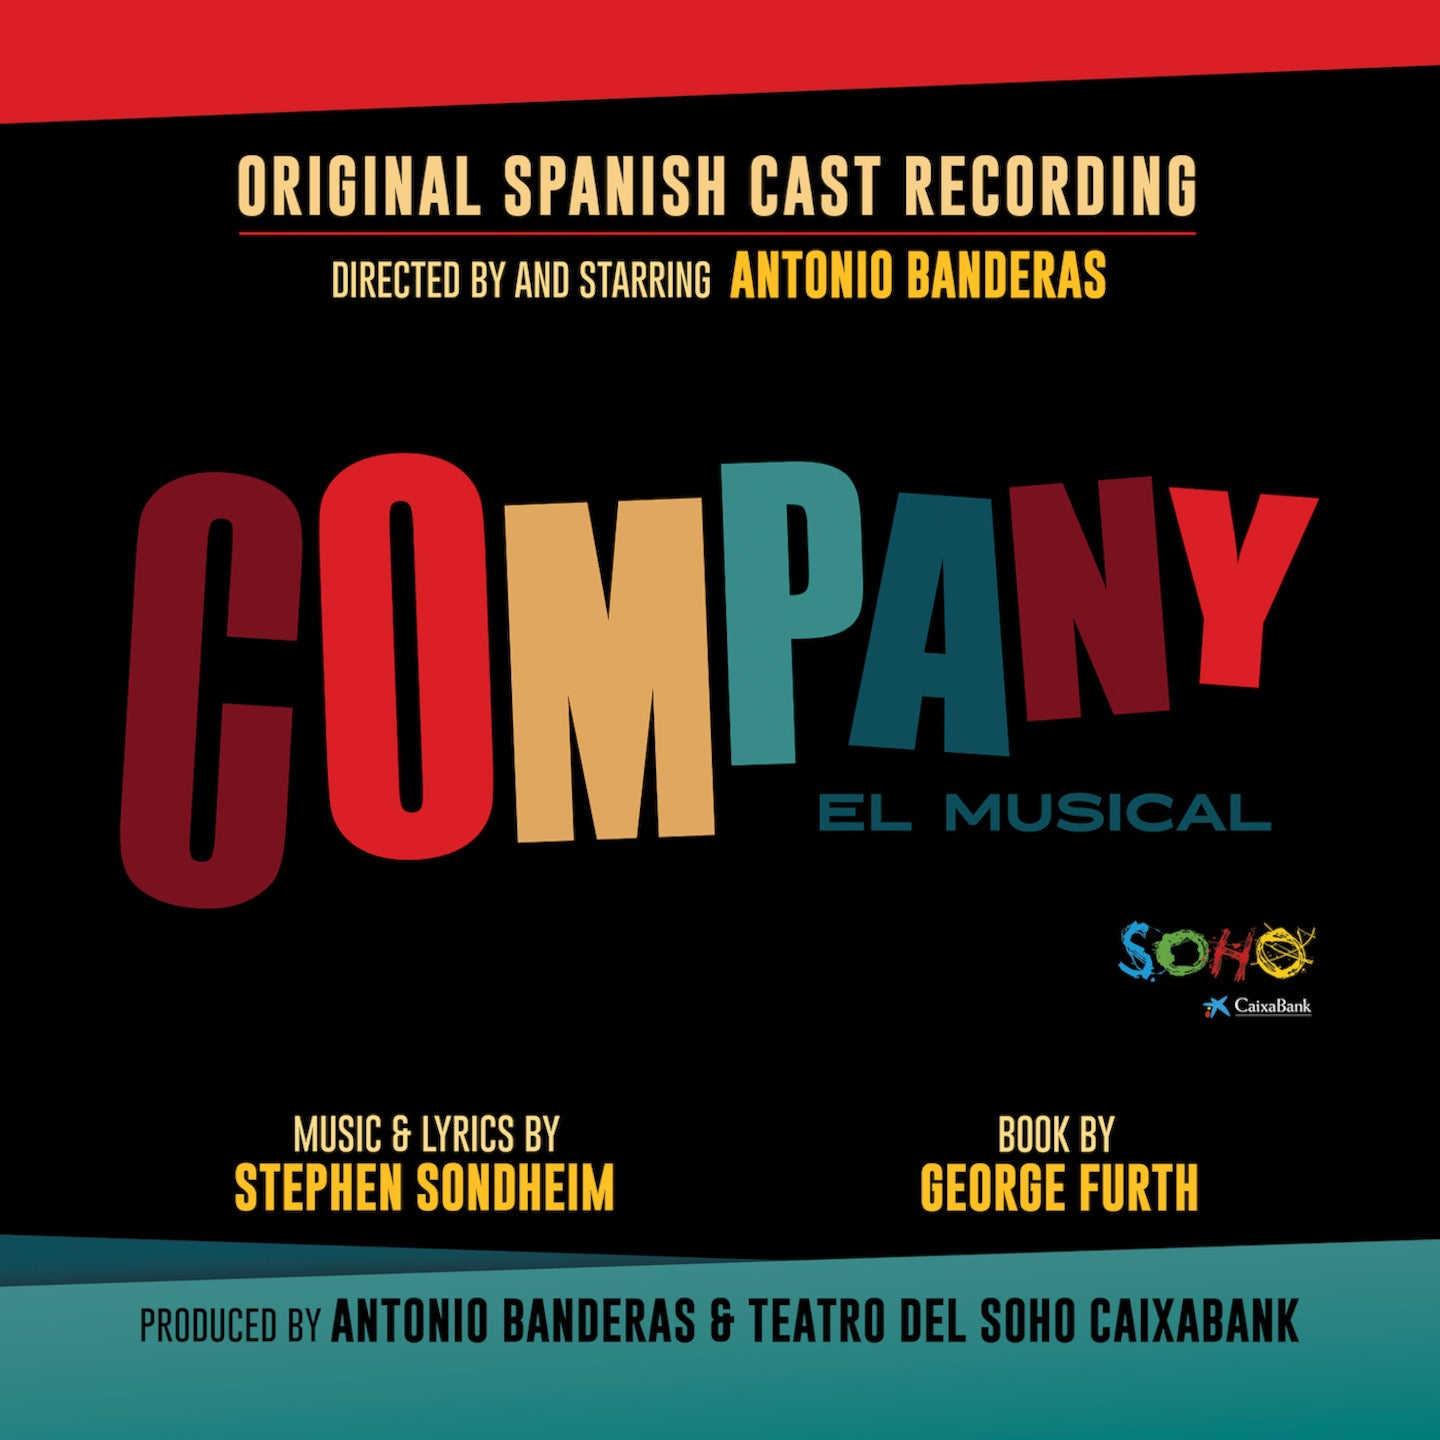 Featured image for “COMPANY (ORIGINAL SPANISH CAST RECORDING) [CD]”